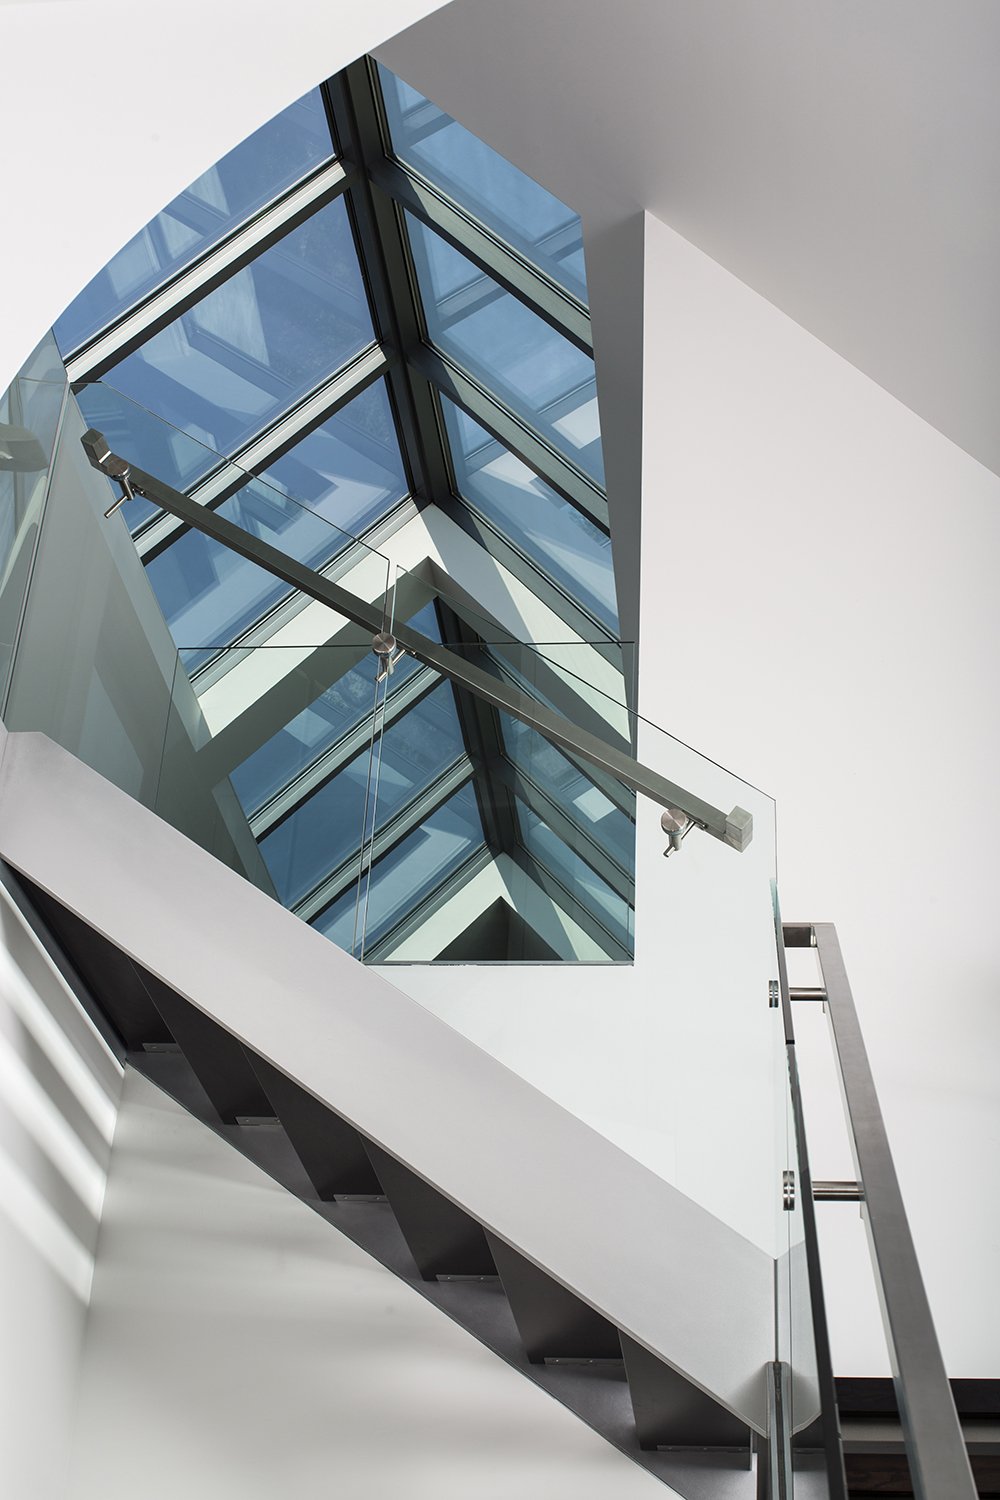 Application-Stairwell-Structural_Skylights-Interesting Upward Angle-3020-0614.jpg